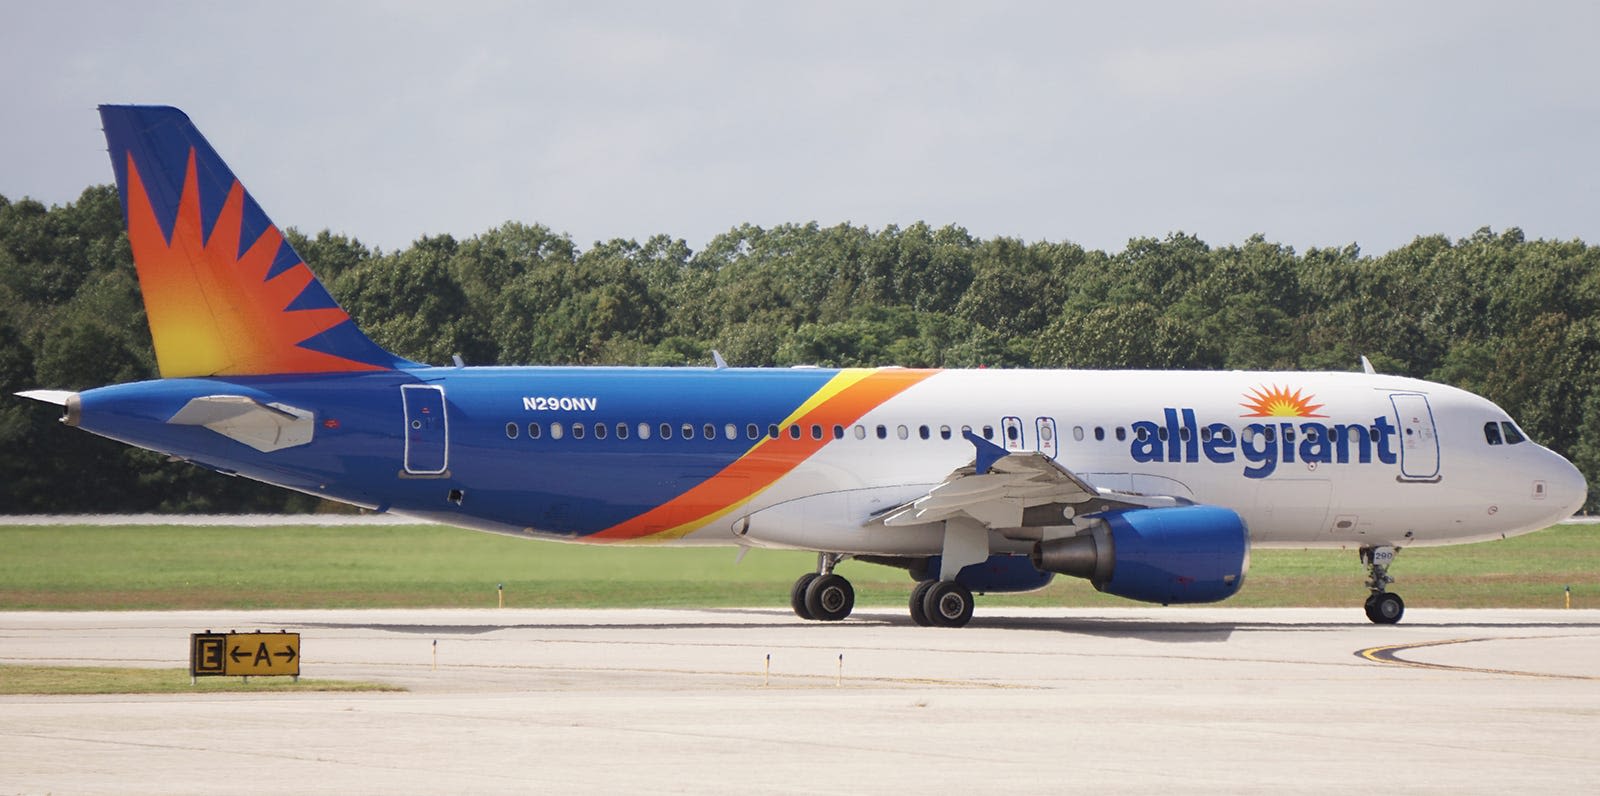 Allegiant adds more than dozen new flights, including several from Florida. Here's where, when